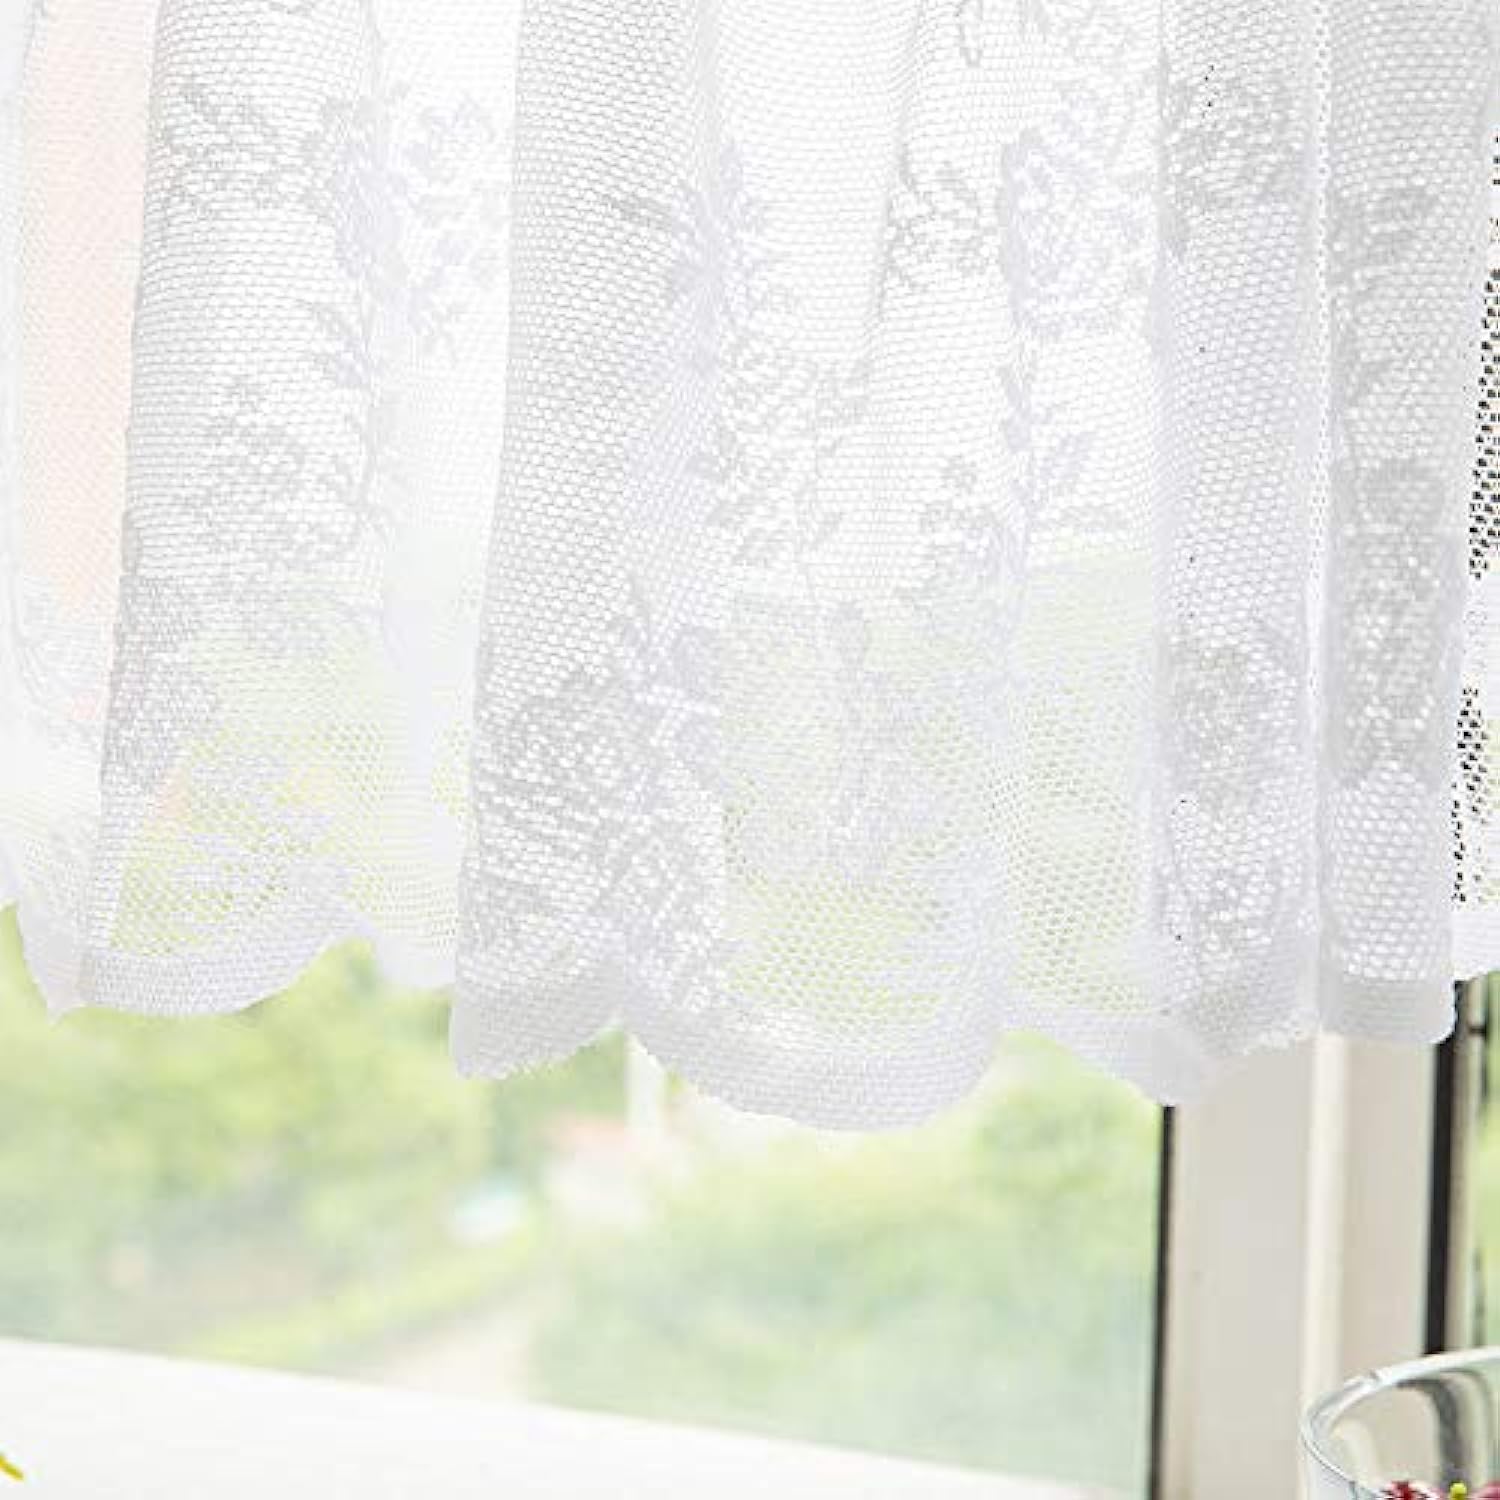 Great Choice Products White Lace Window Valances 59X18Inch, Rod Pocket Curtain Sheer Valance, For Home Kitchen Decor Window Treatments (59X18 …